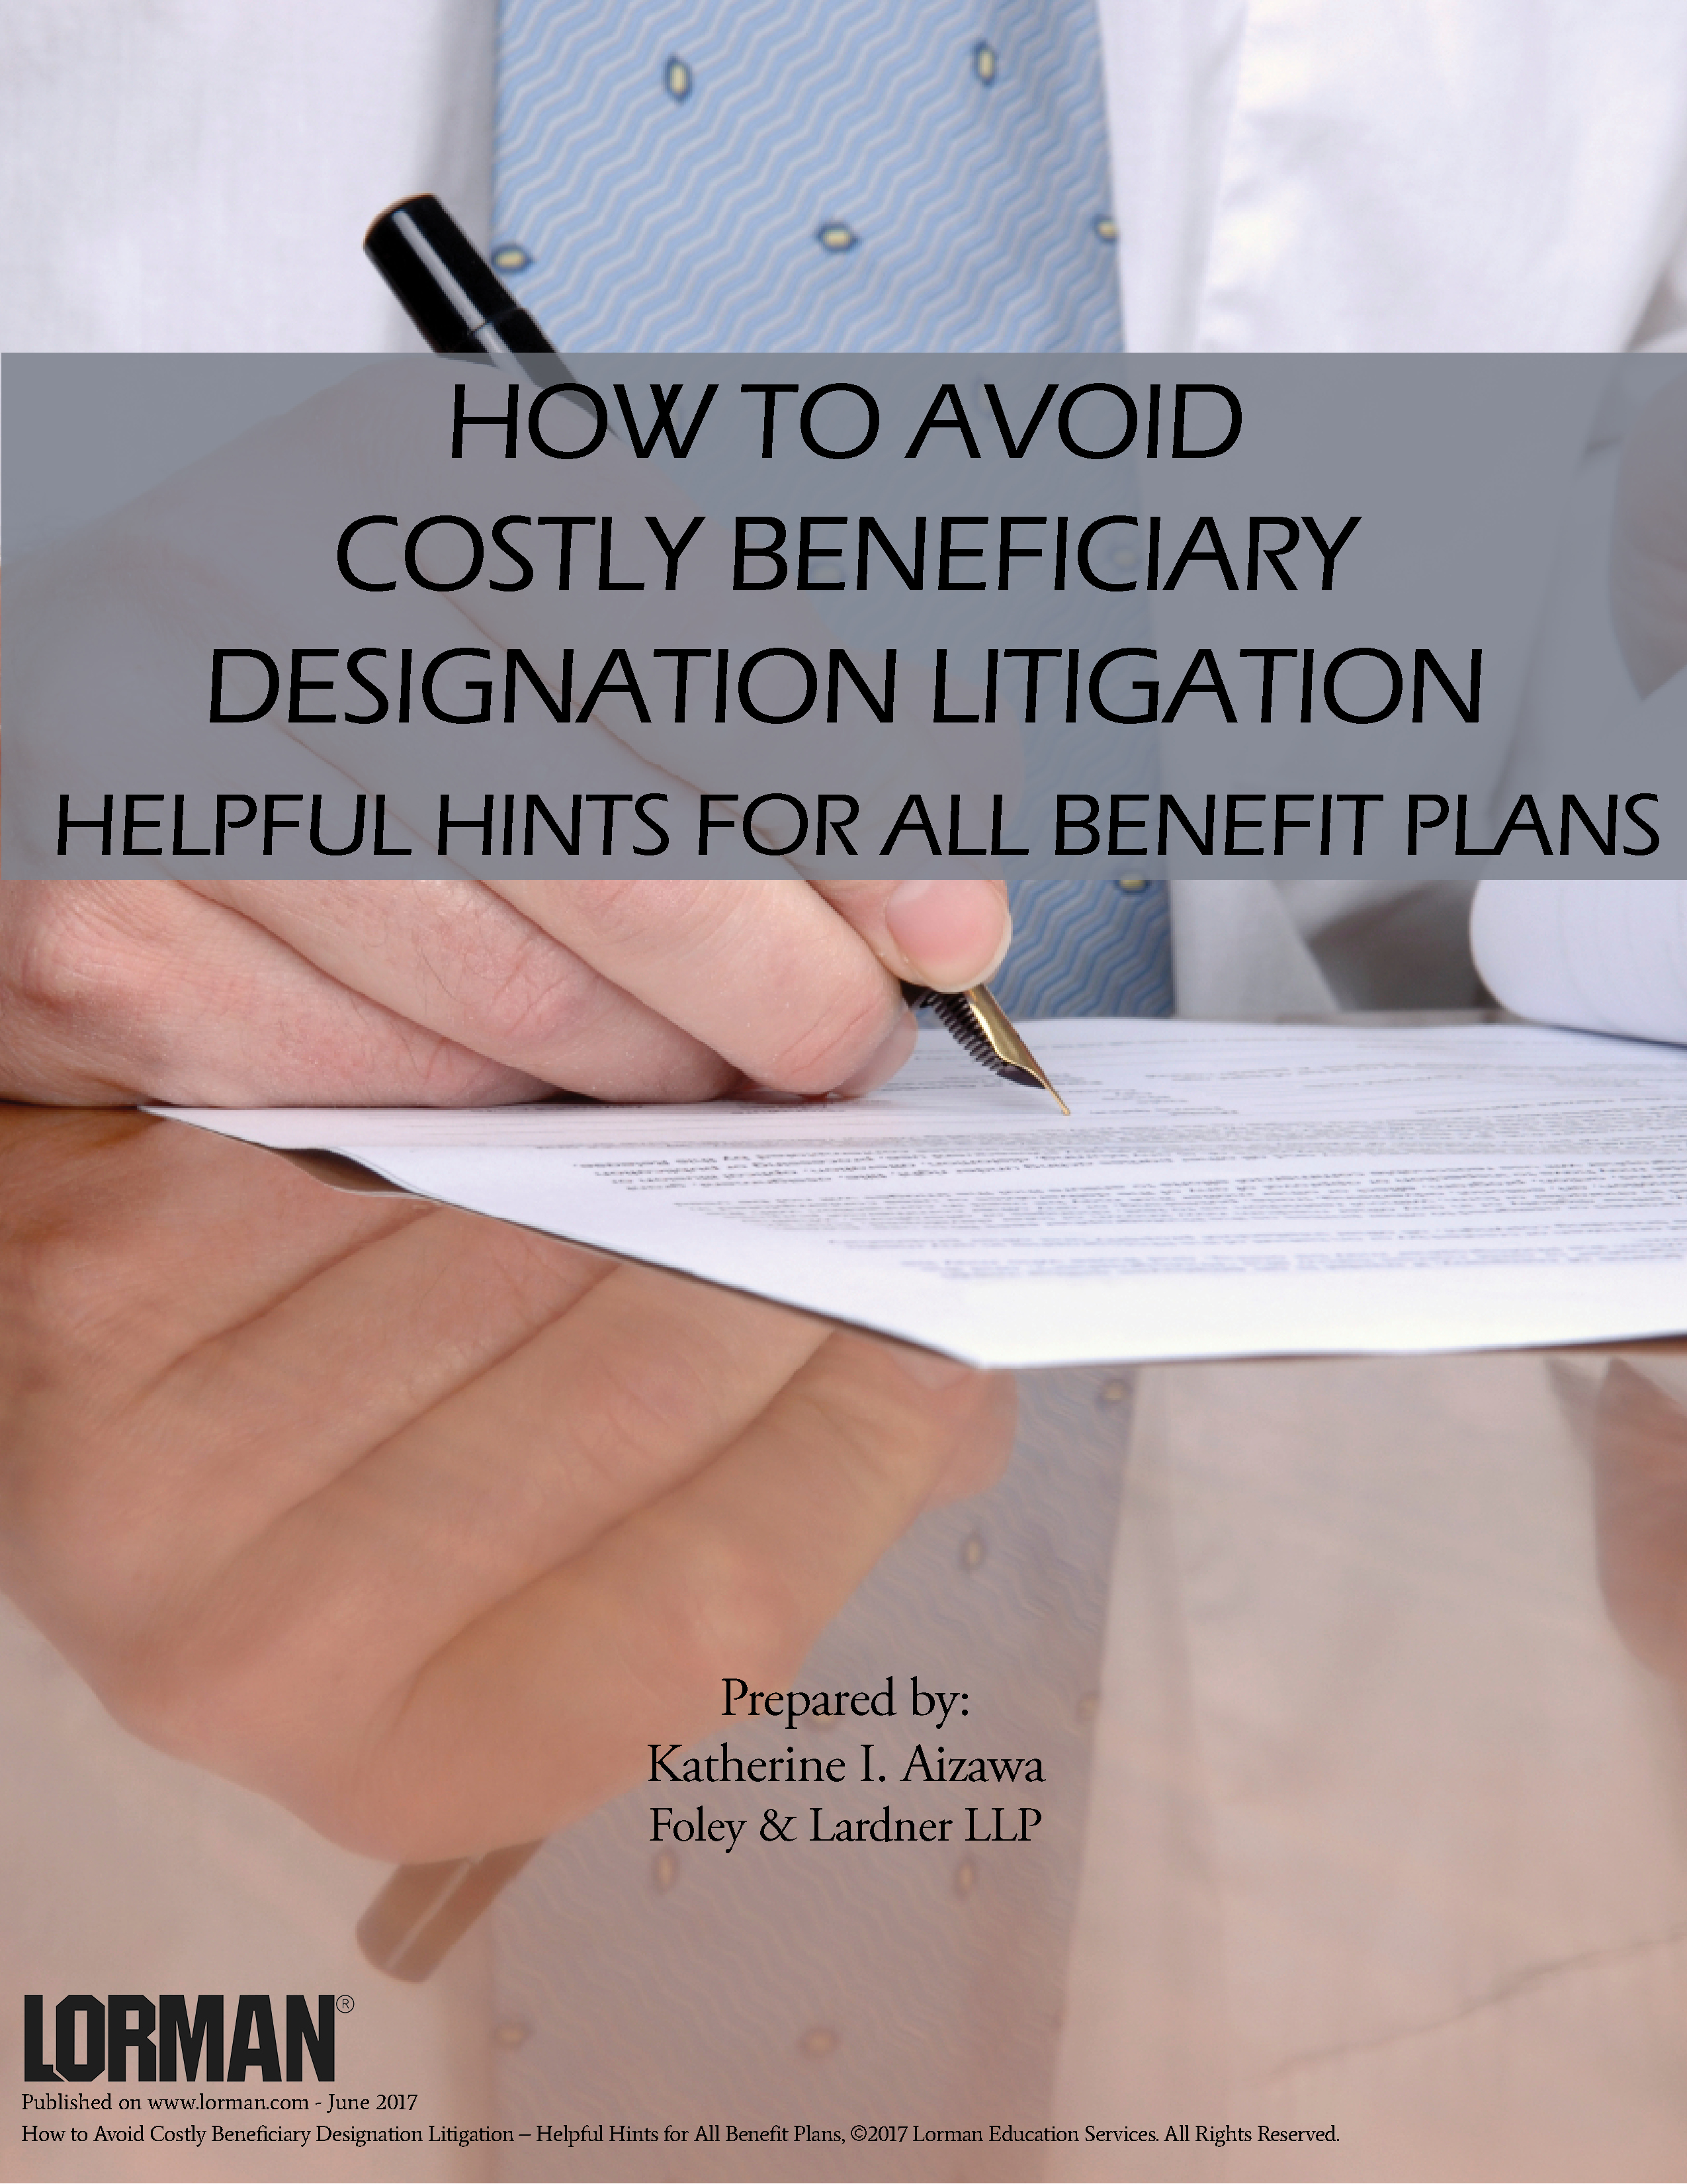 How to Avoid Costly Beneficiary Designation Litigation – Helpful Hints for All Benefit Plans